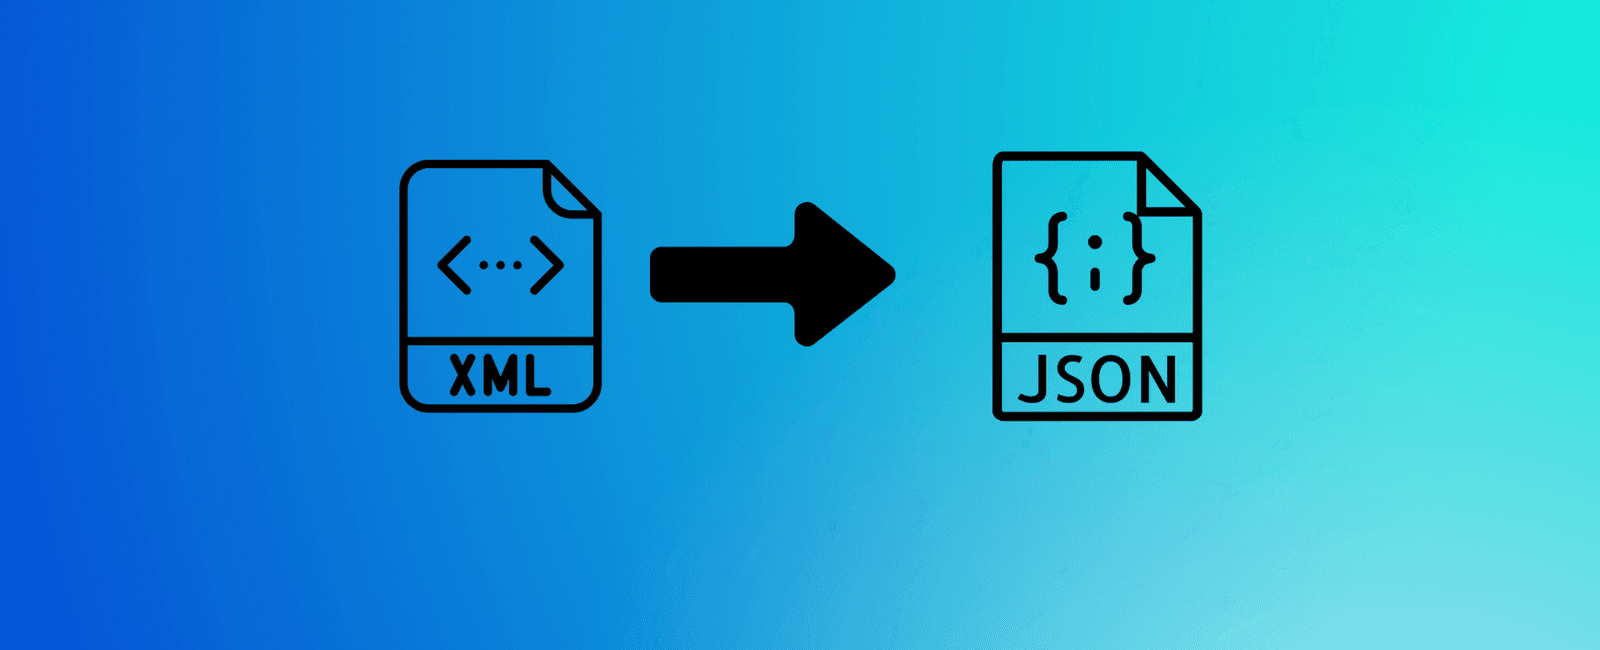 Easily Convert XML to JSON in Azure Logic Apps Without Liquid Templates